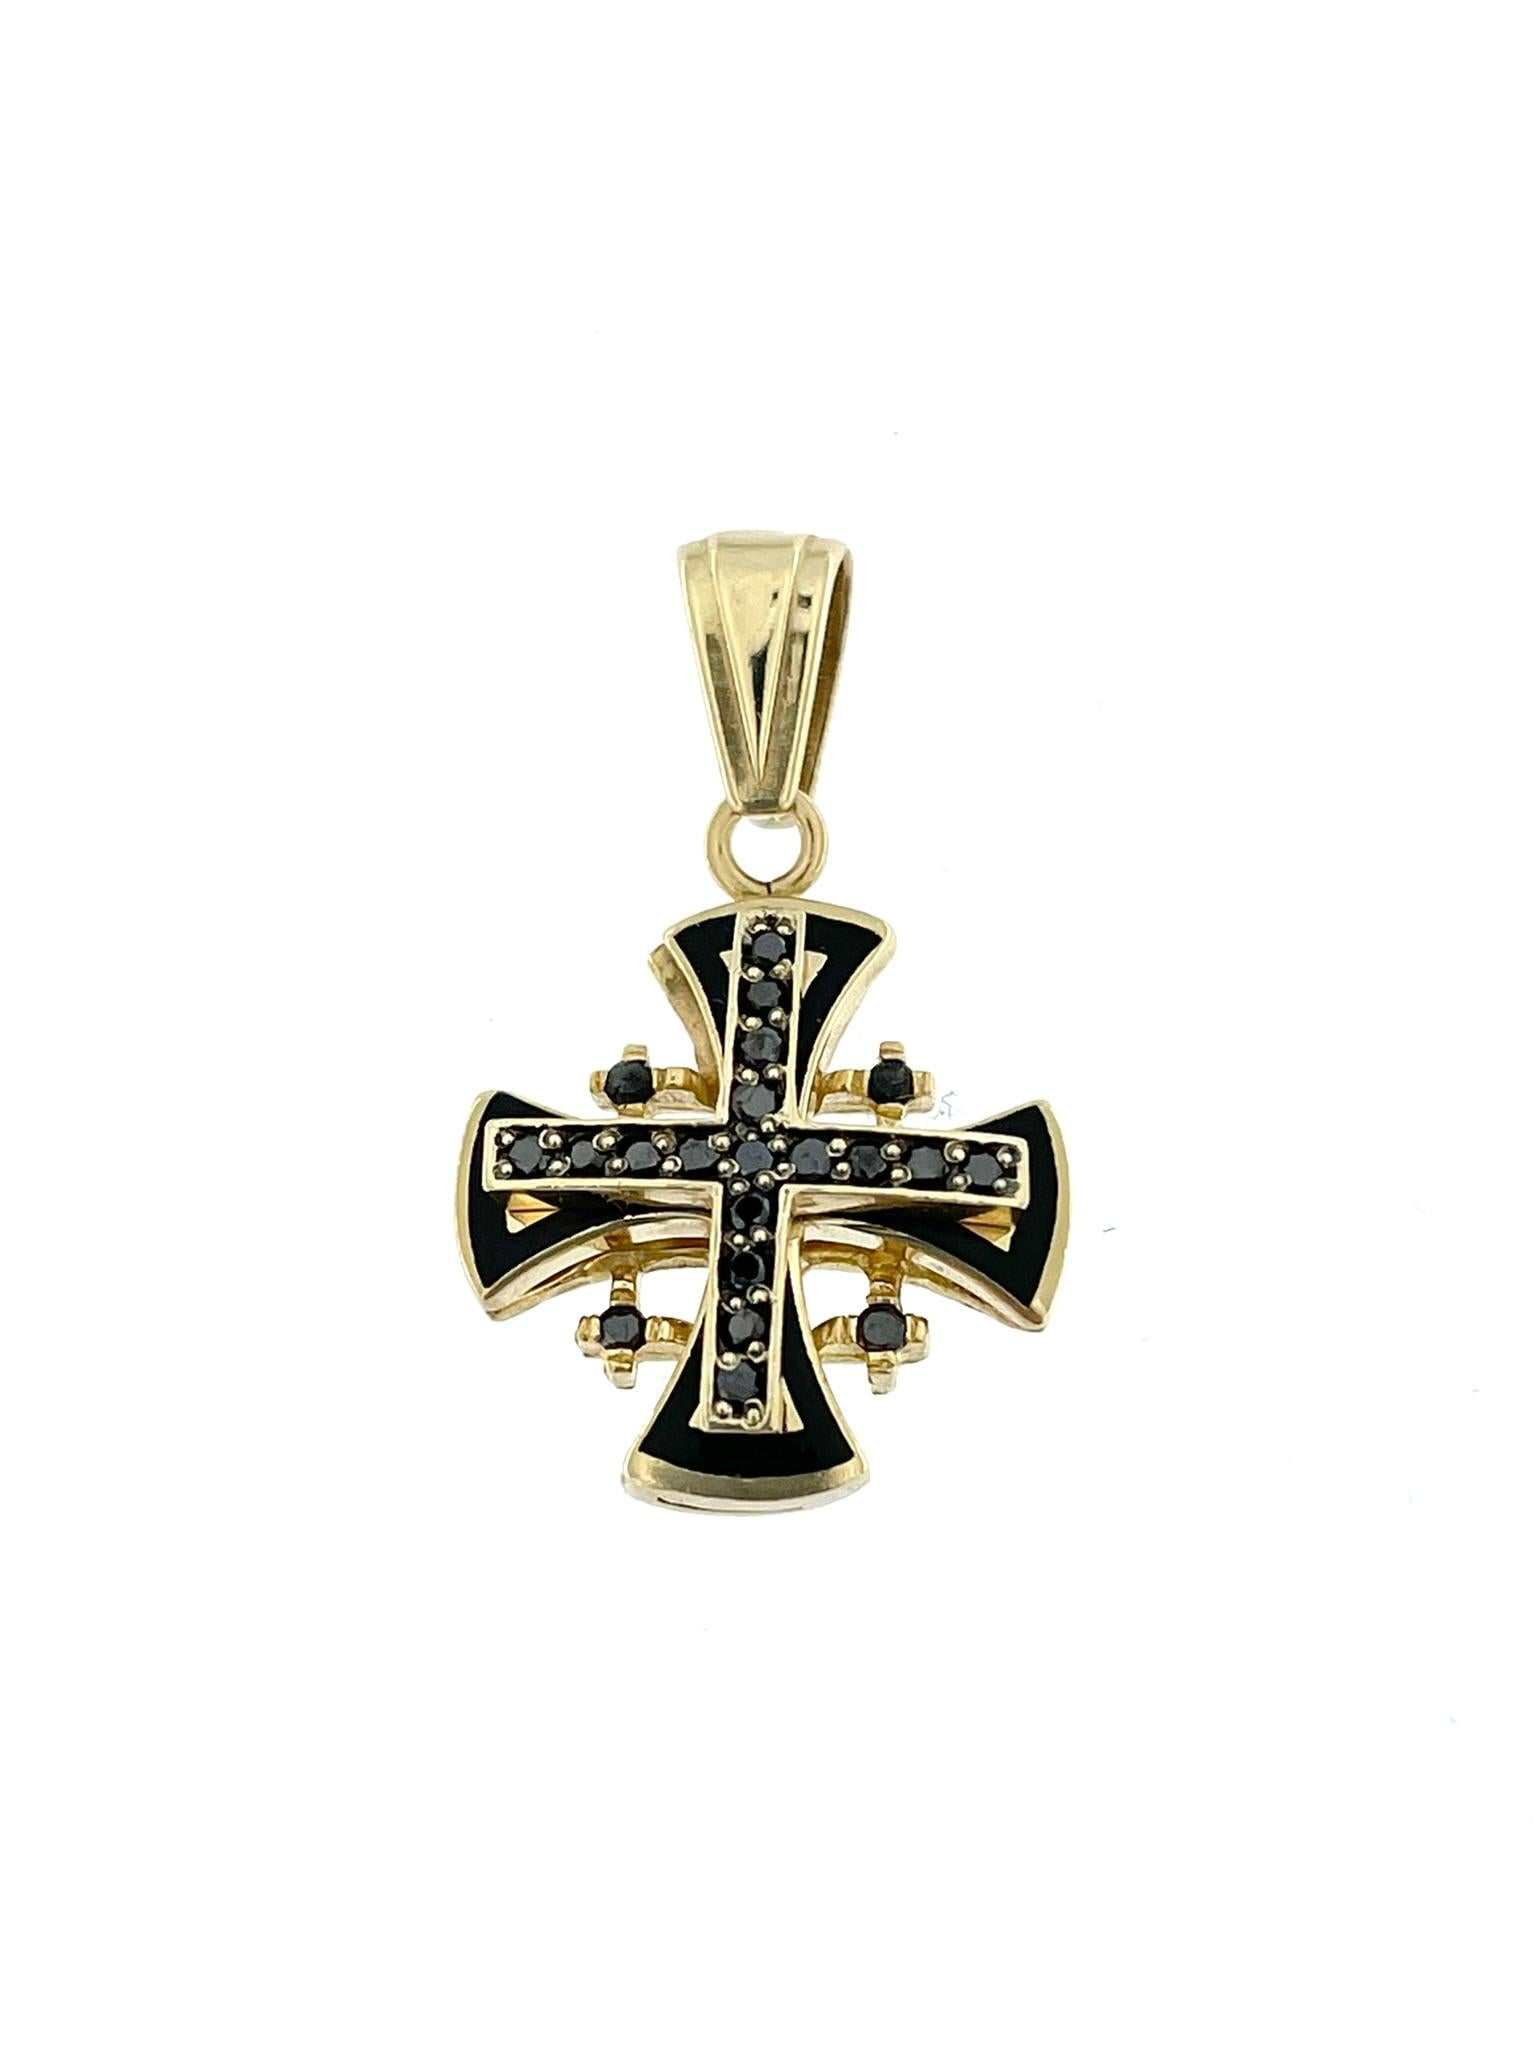 The Templar Cross in 14-karat Yellow Gold is a striking and symbolic piece that draws inspiration from the historical and iconic symbols associated with the Knights Templar. Crafted with meticulous detail, this cross is both a symbol of faith and a